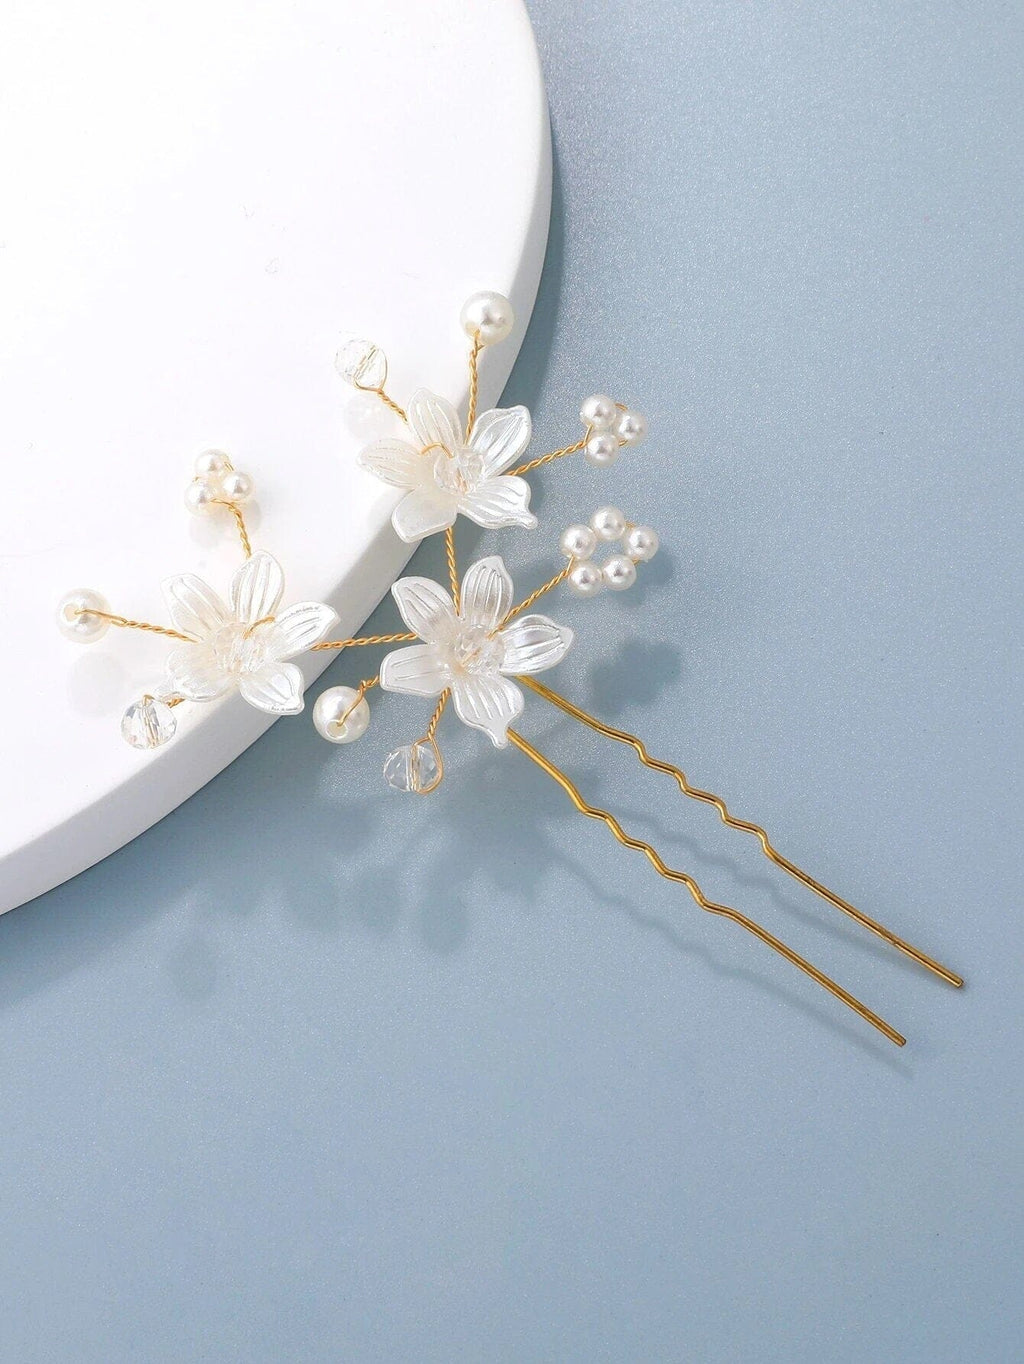 Pearl Flower Gold Wire Hairpin, Three Flowers Wedding Hair Pin Hairpiece, Bridal Pearl Floral Hairpin - KaleaBoutique.com